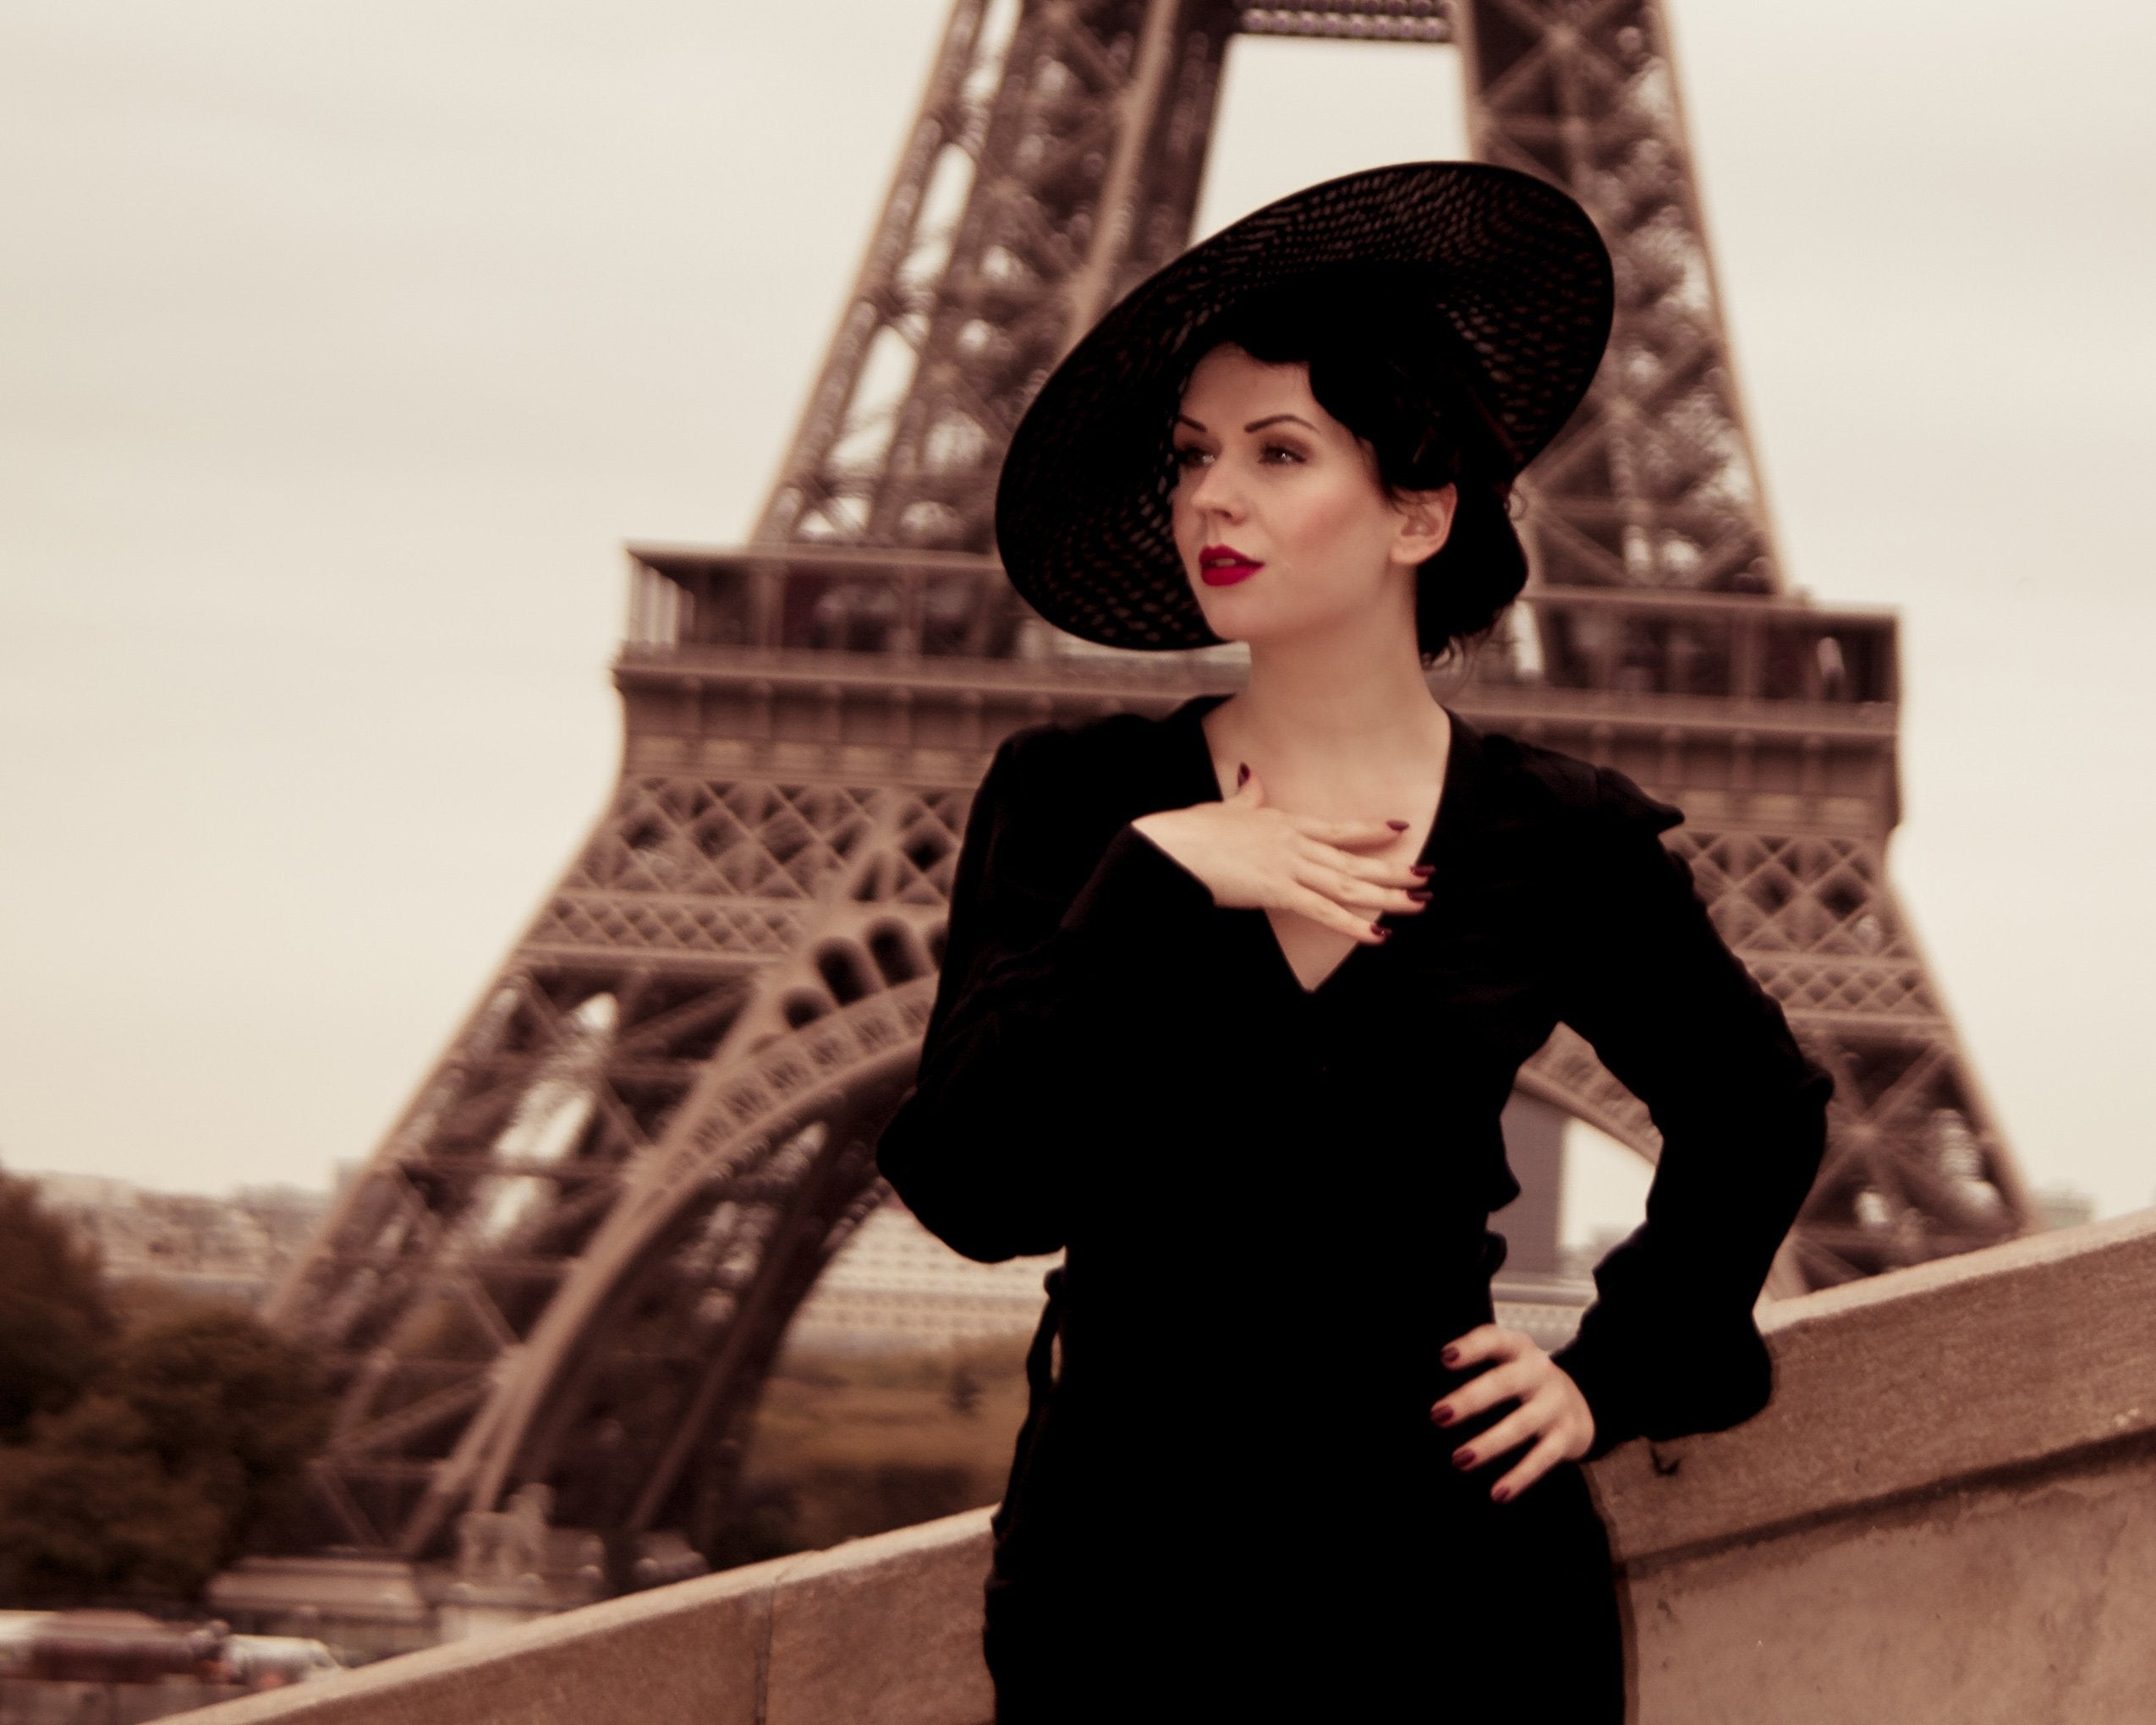 HALO HAT - BLACK HEADDRESS IN THE ELEGANT NEW LOOK OF THE 50S, THIS VINTAGE STYLE IS ALWAYS CONTEMPORARY © Seegang Berlin